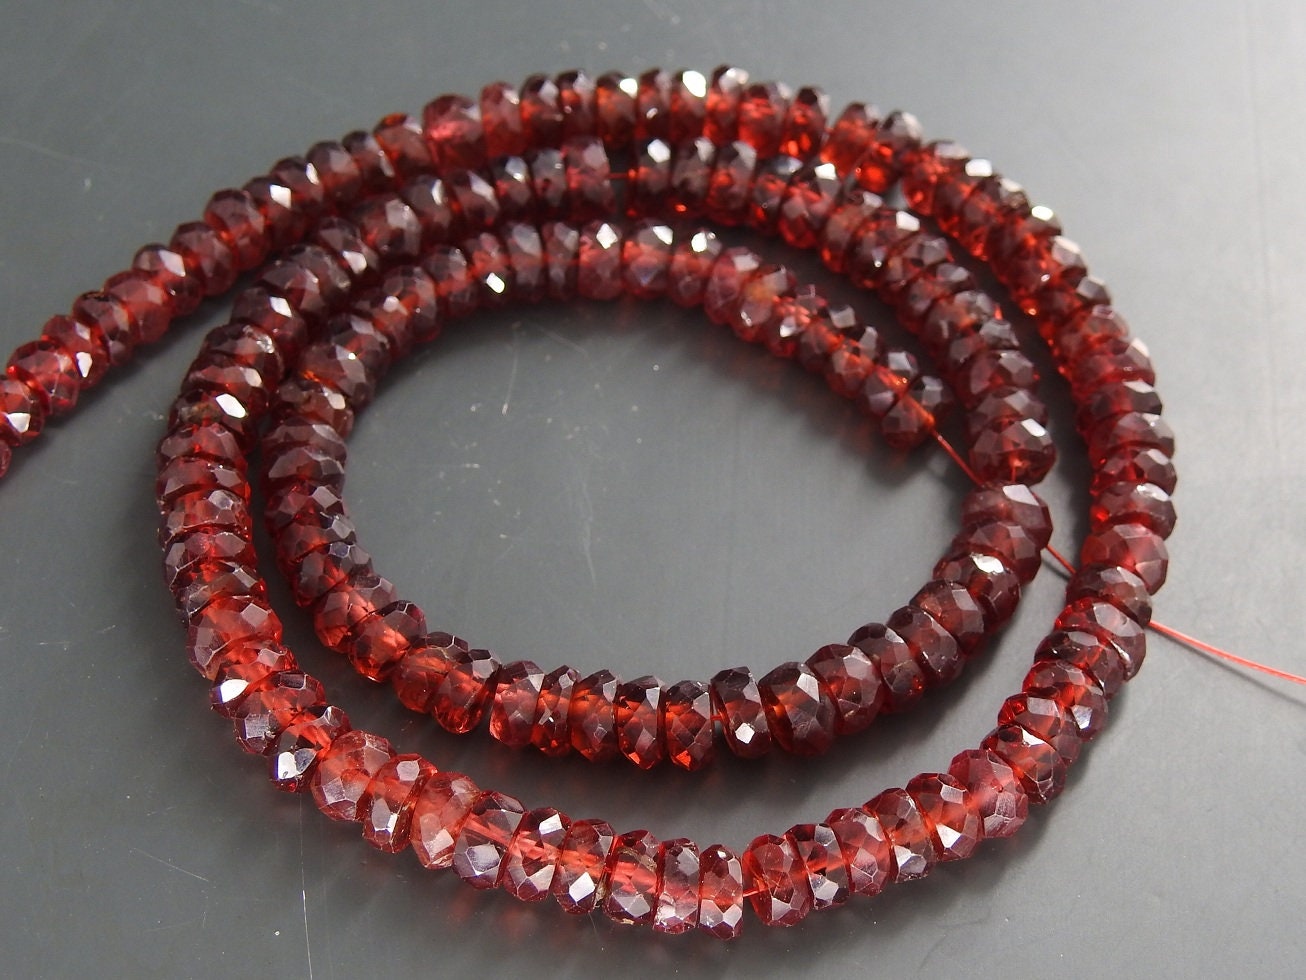 Mozambique Garnet Faceted Roundel Beads,Handmade,Loose Stone,Necklace,For Making Jewelry,16Inch Strand,Wholesaler,Supplies,100%NaturalBB(B6) | Save 33% - Rajasthan Living 24